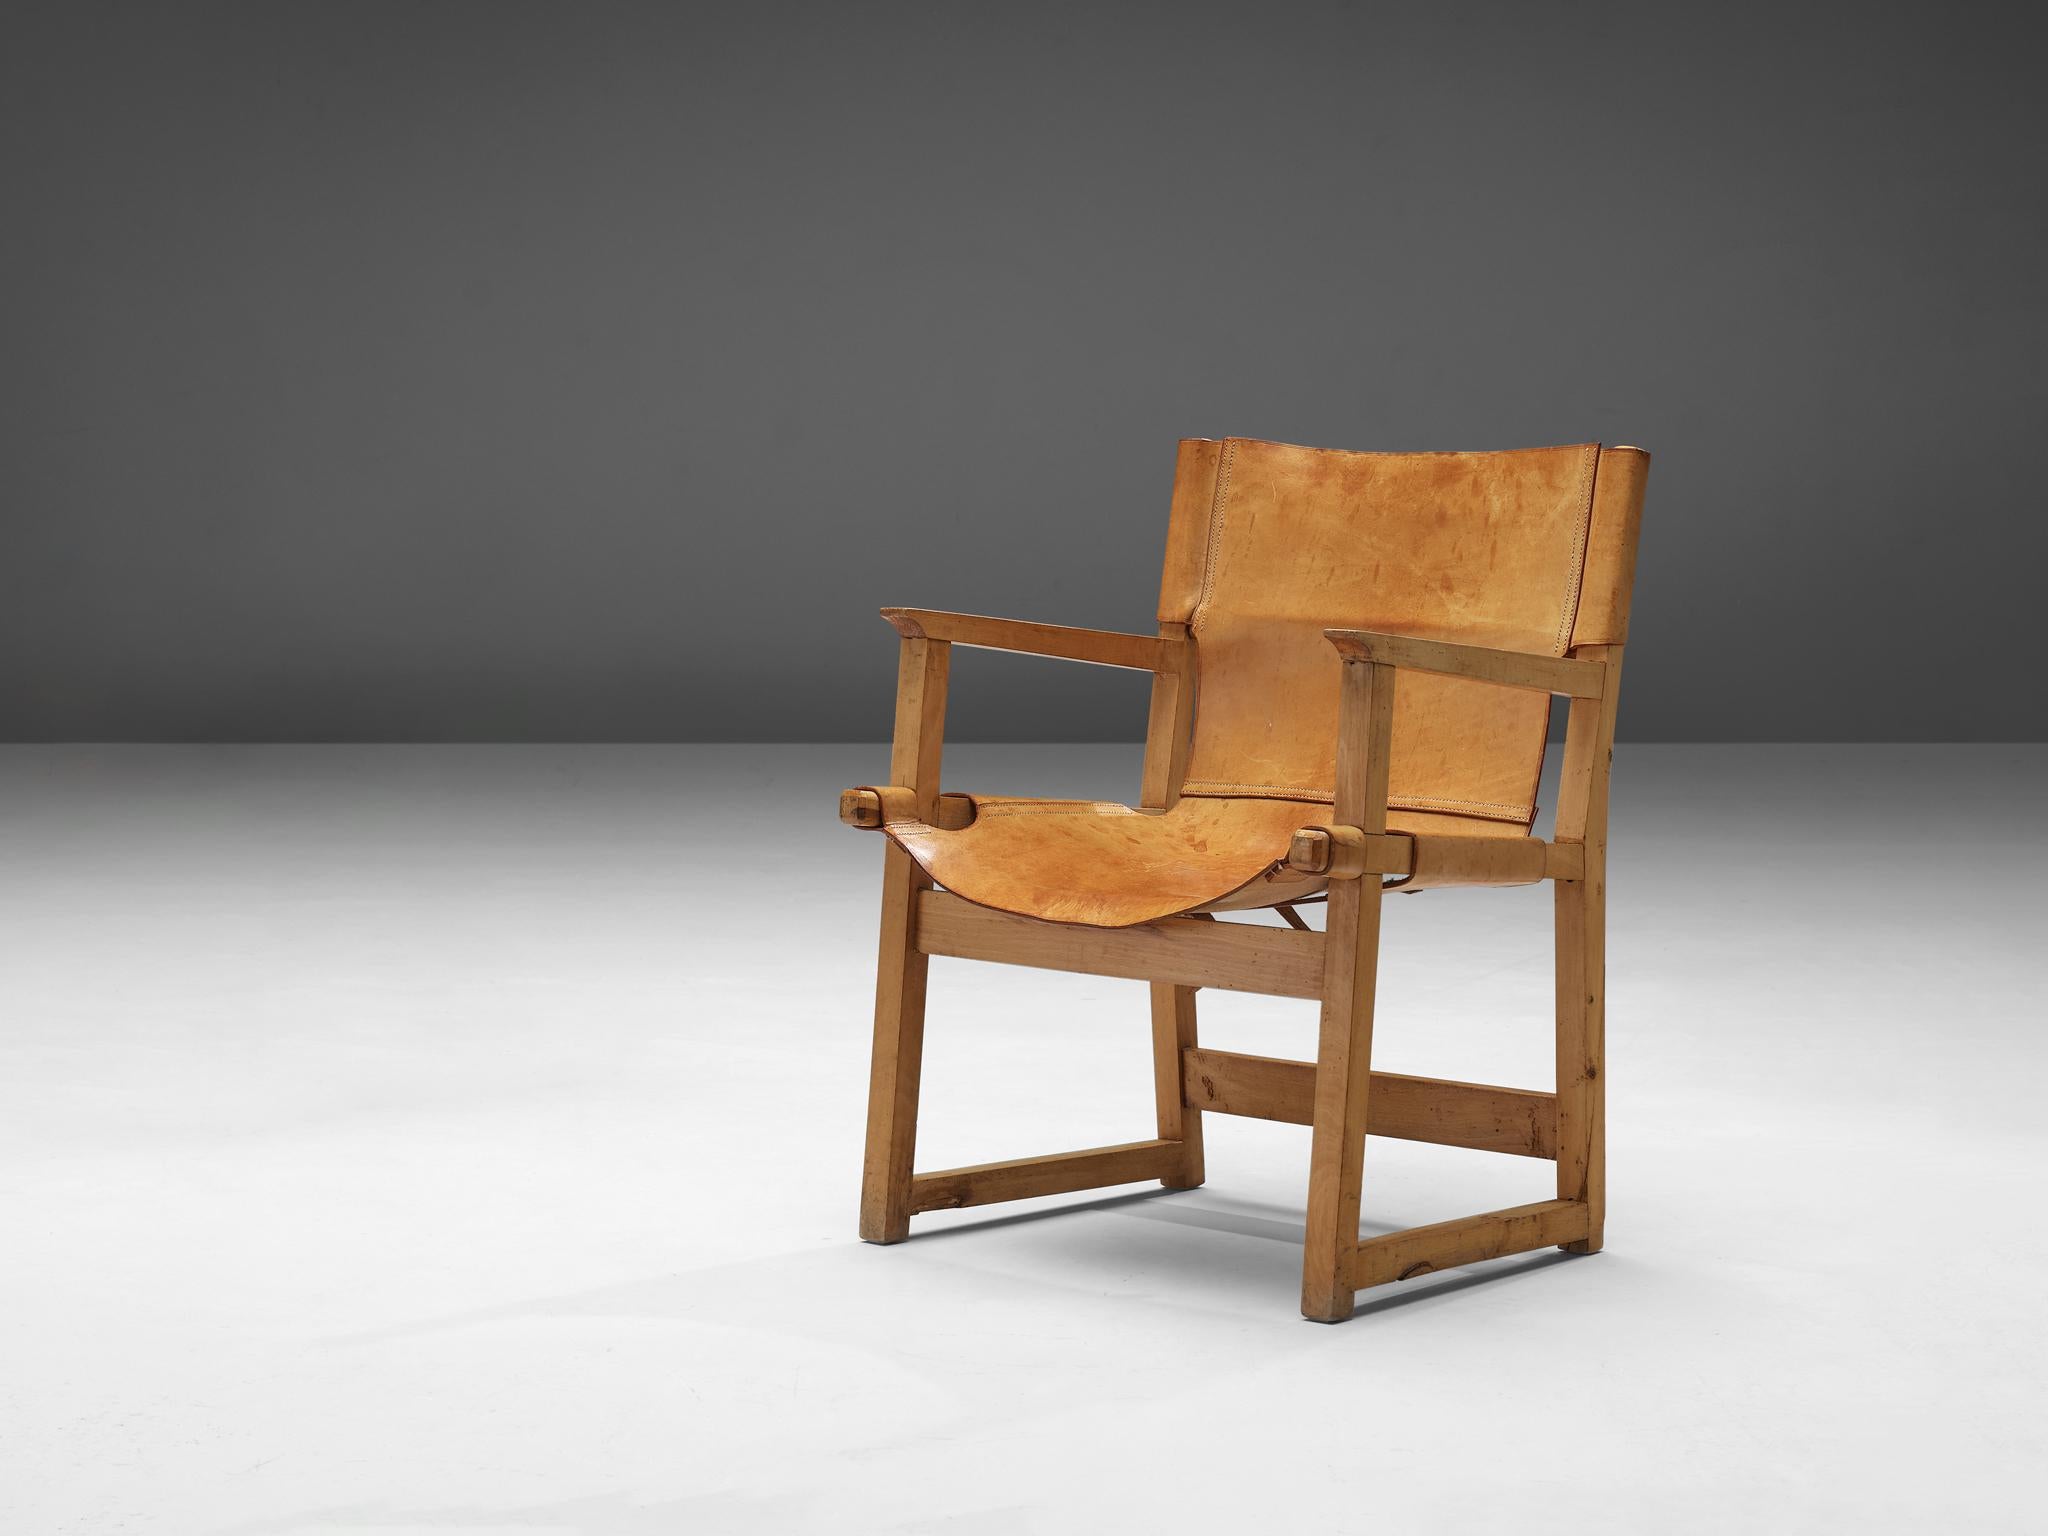 Paco Muñoz, armchair, leather, beech, Spain, 1950s

Midcentury Safari or ‘Riaza’ armchair by Spanish designer Paco Muñoz. This chair is made of high quality saddle leather with removable buckles underneath the seating. The leather has aged elegantly